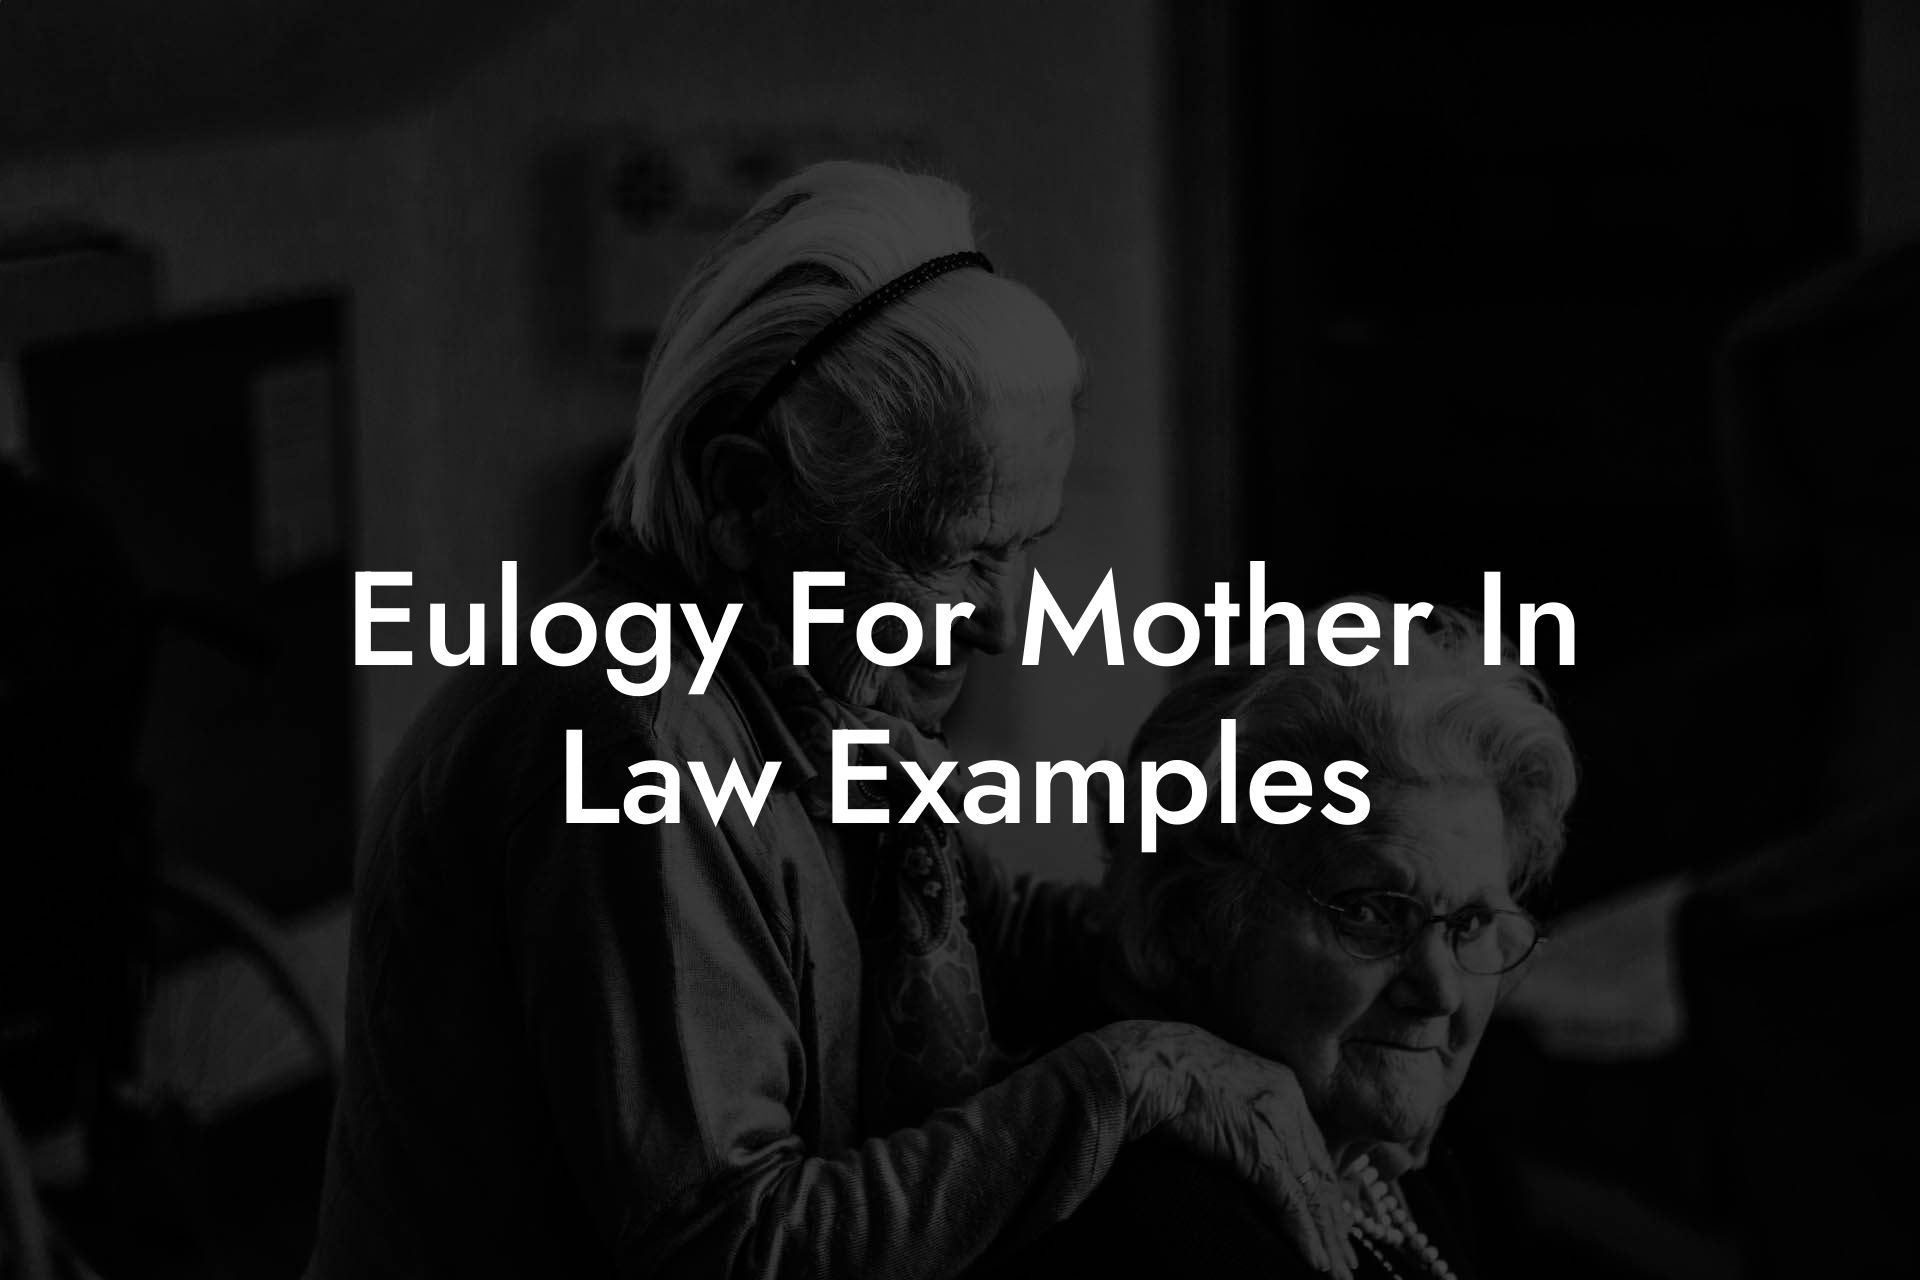 Eulogy For Mother In Law Examples